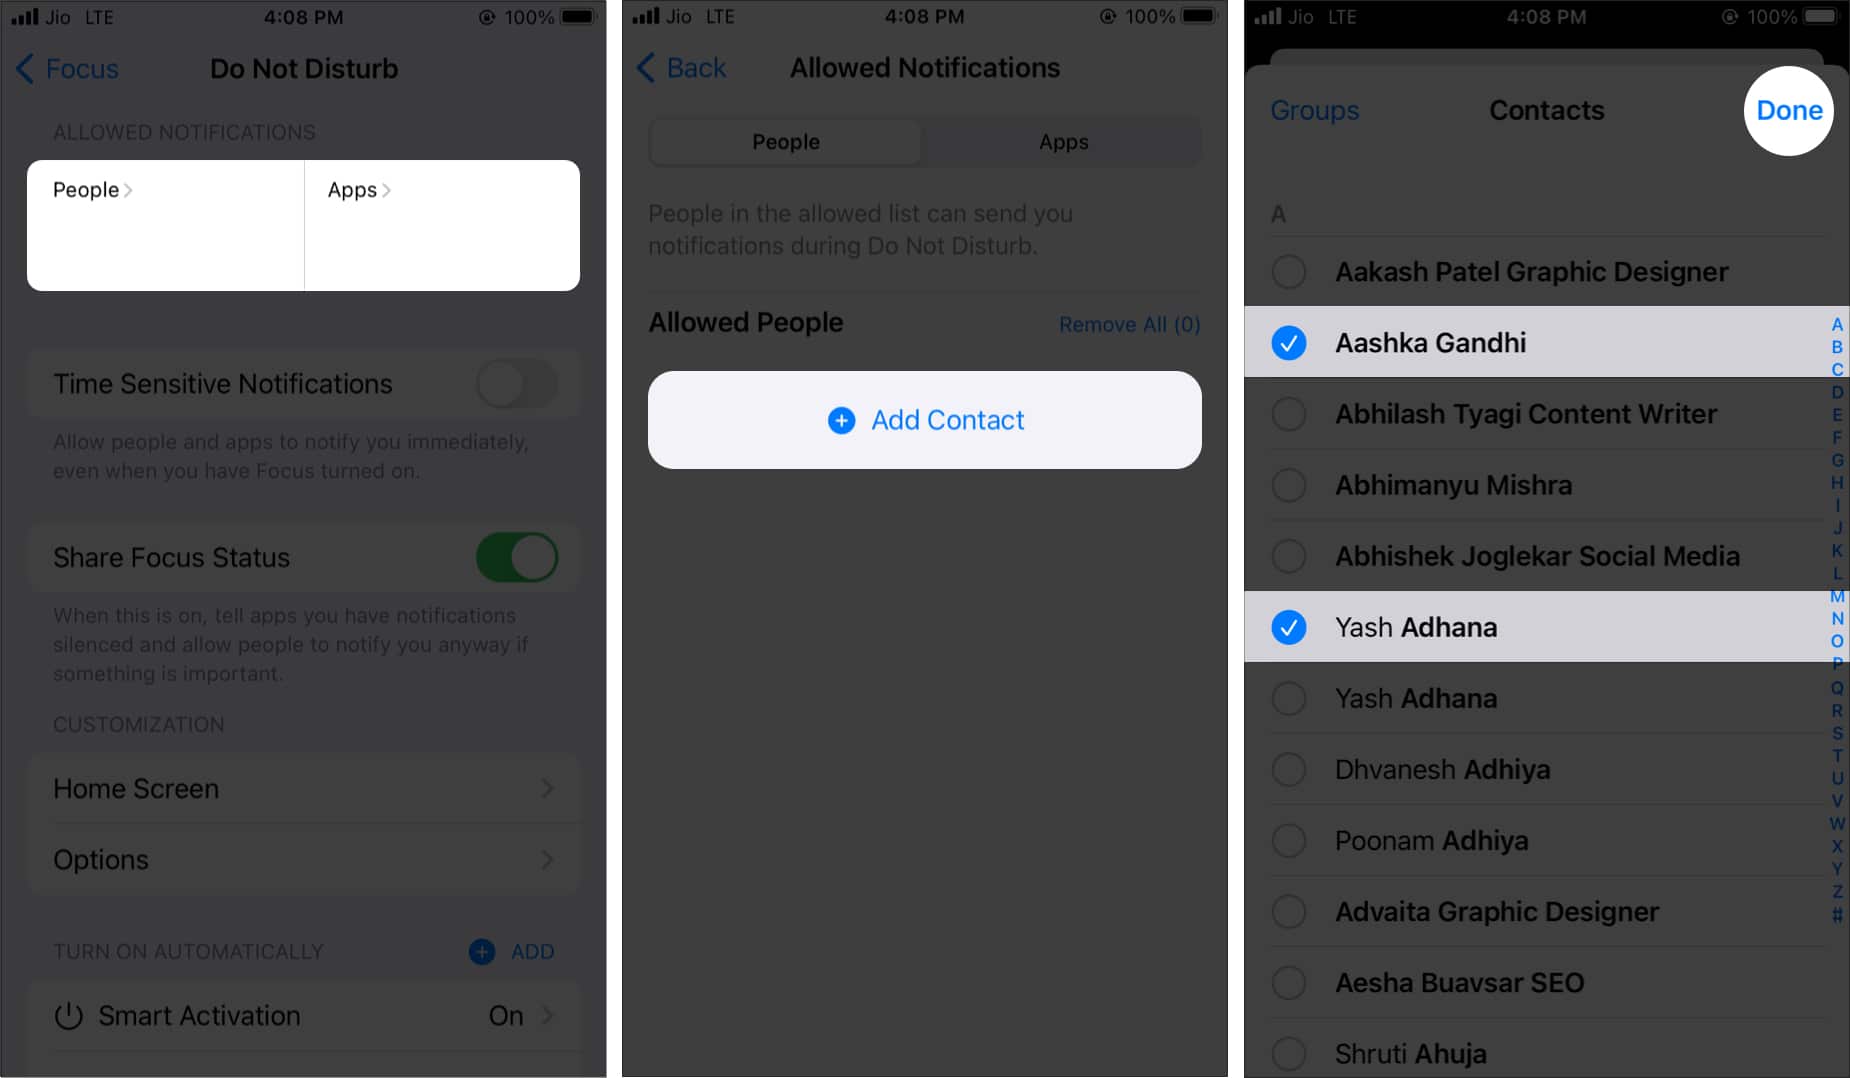 How to allow notifications during DND from specific people and apps on iPhone